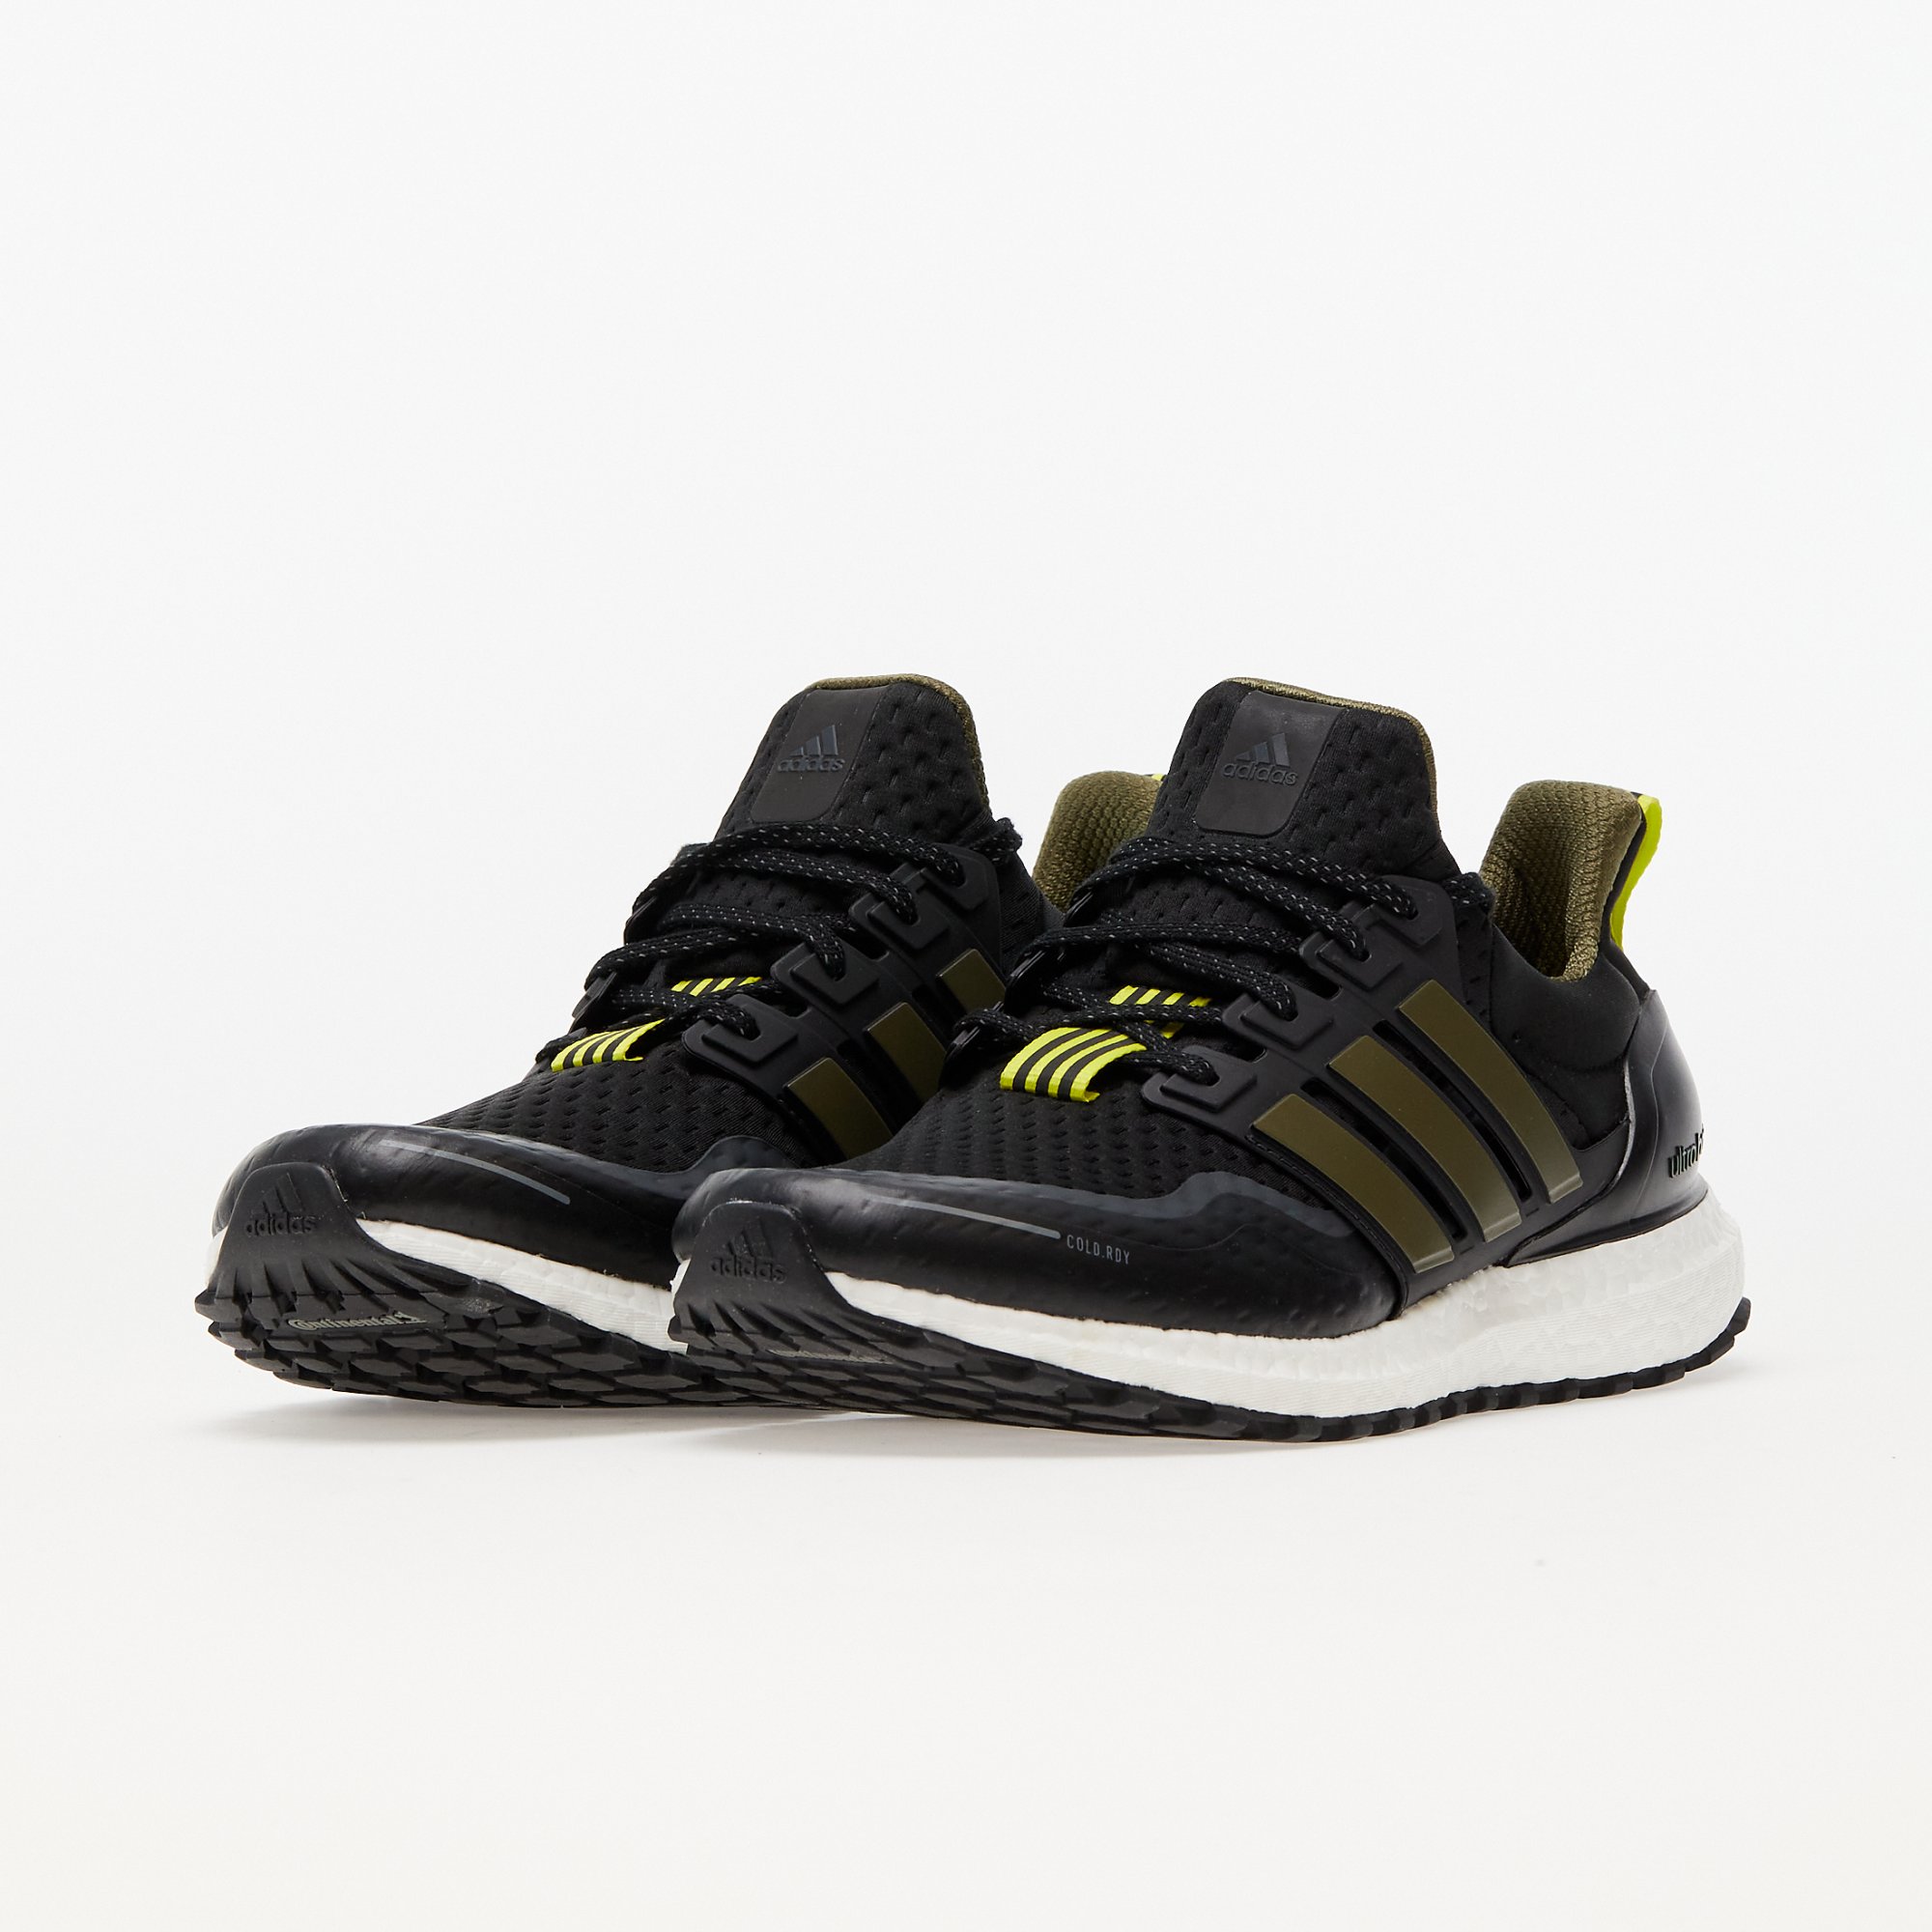 adidas Performance Ultraboost C.RDY DNA Core Black / Focus Olive / Black Blue Met. adidas Performance